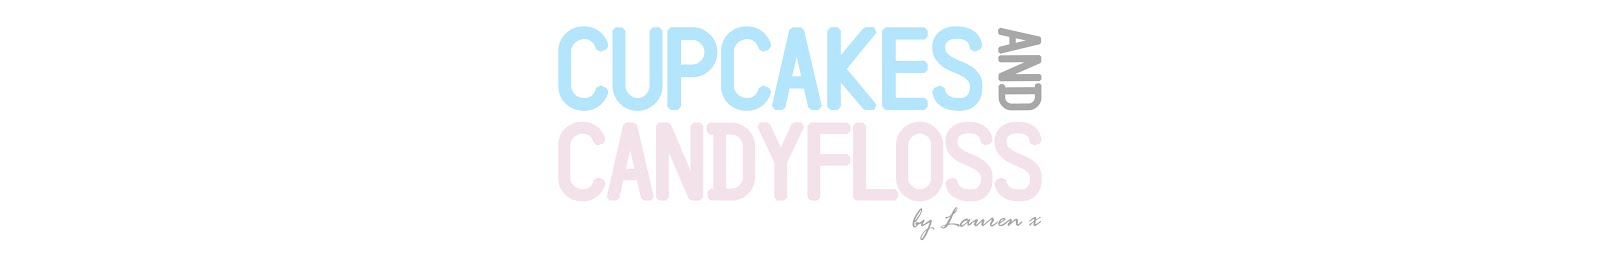 Cupcakes and Candyfloss 